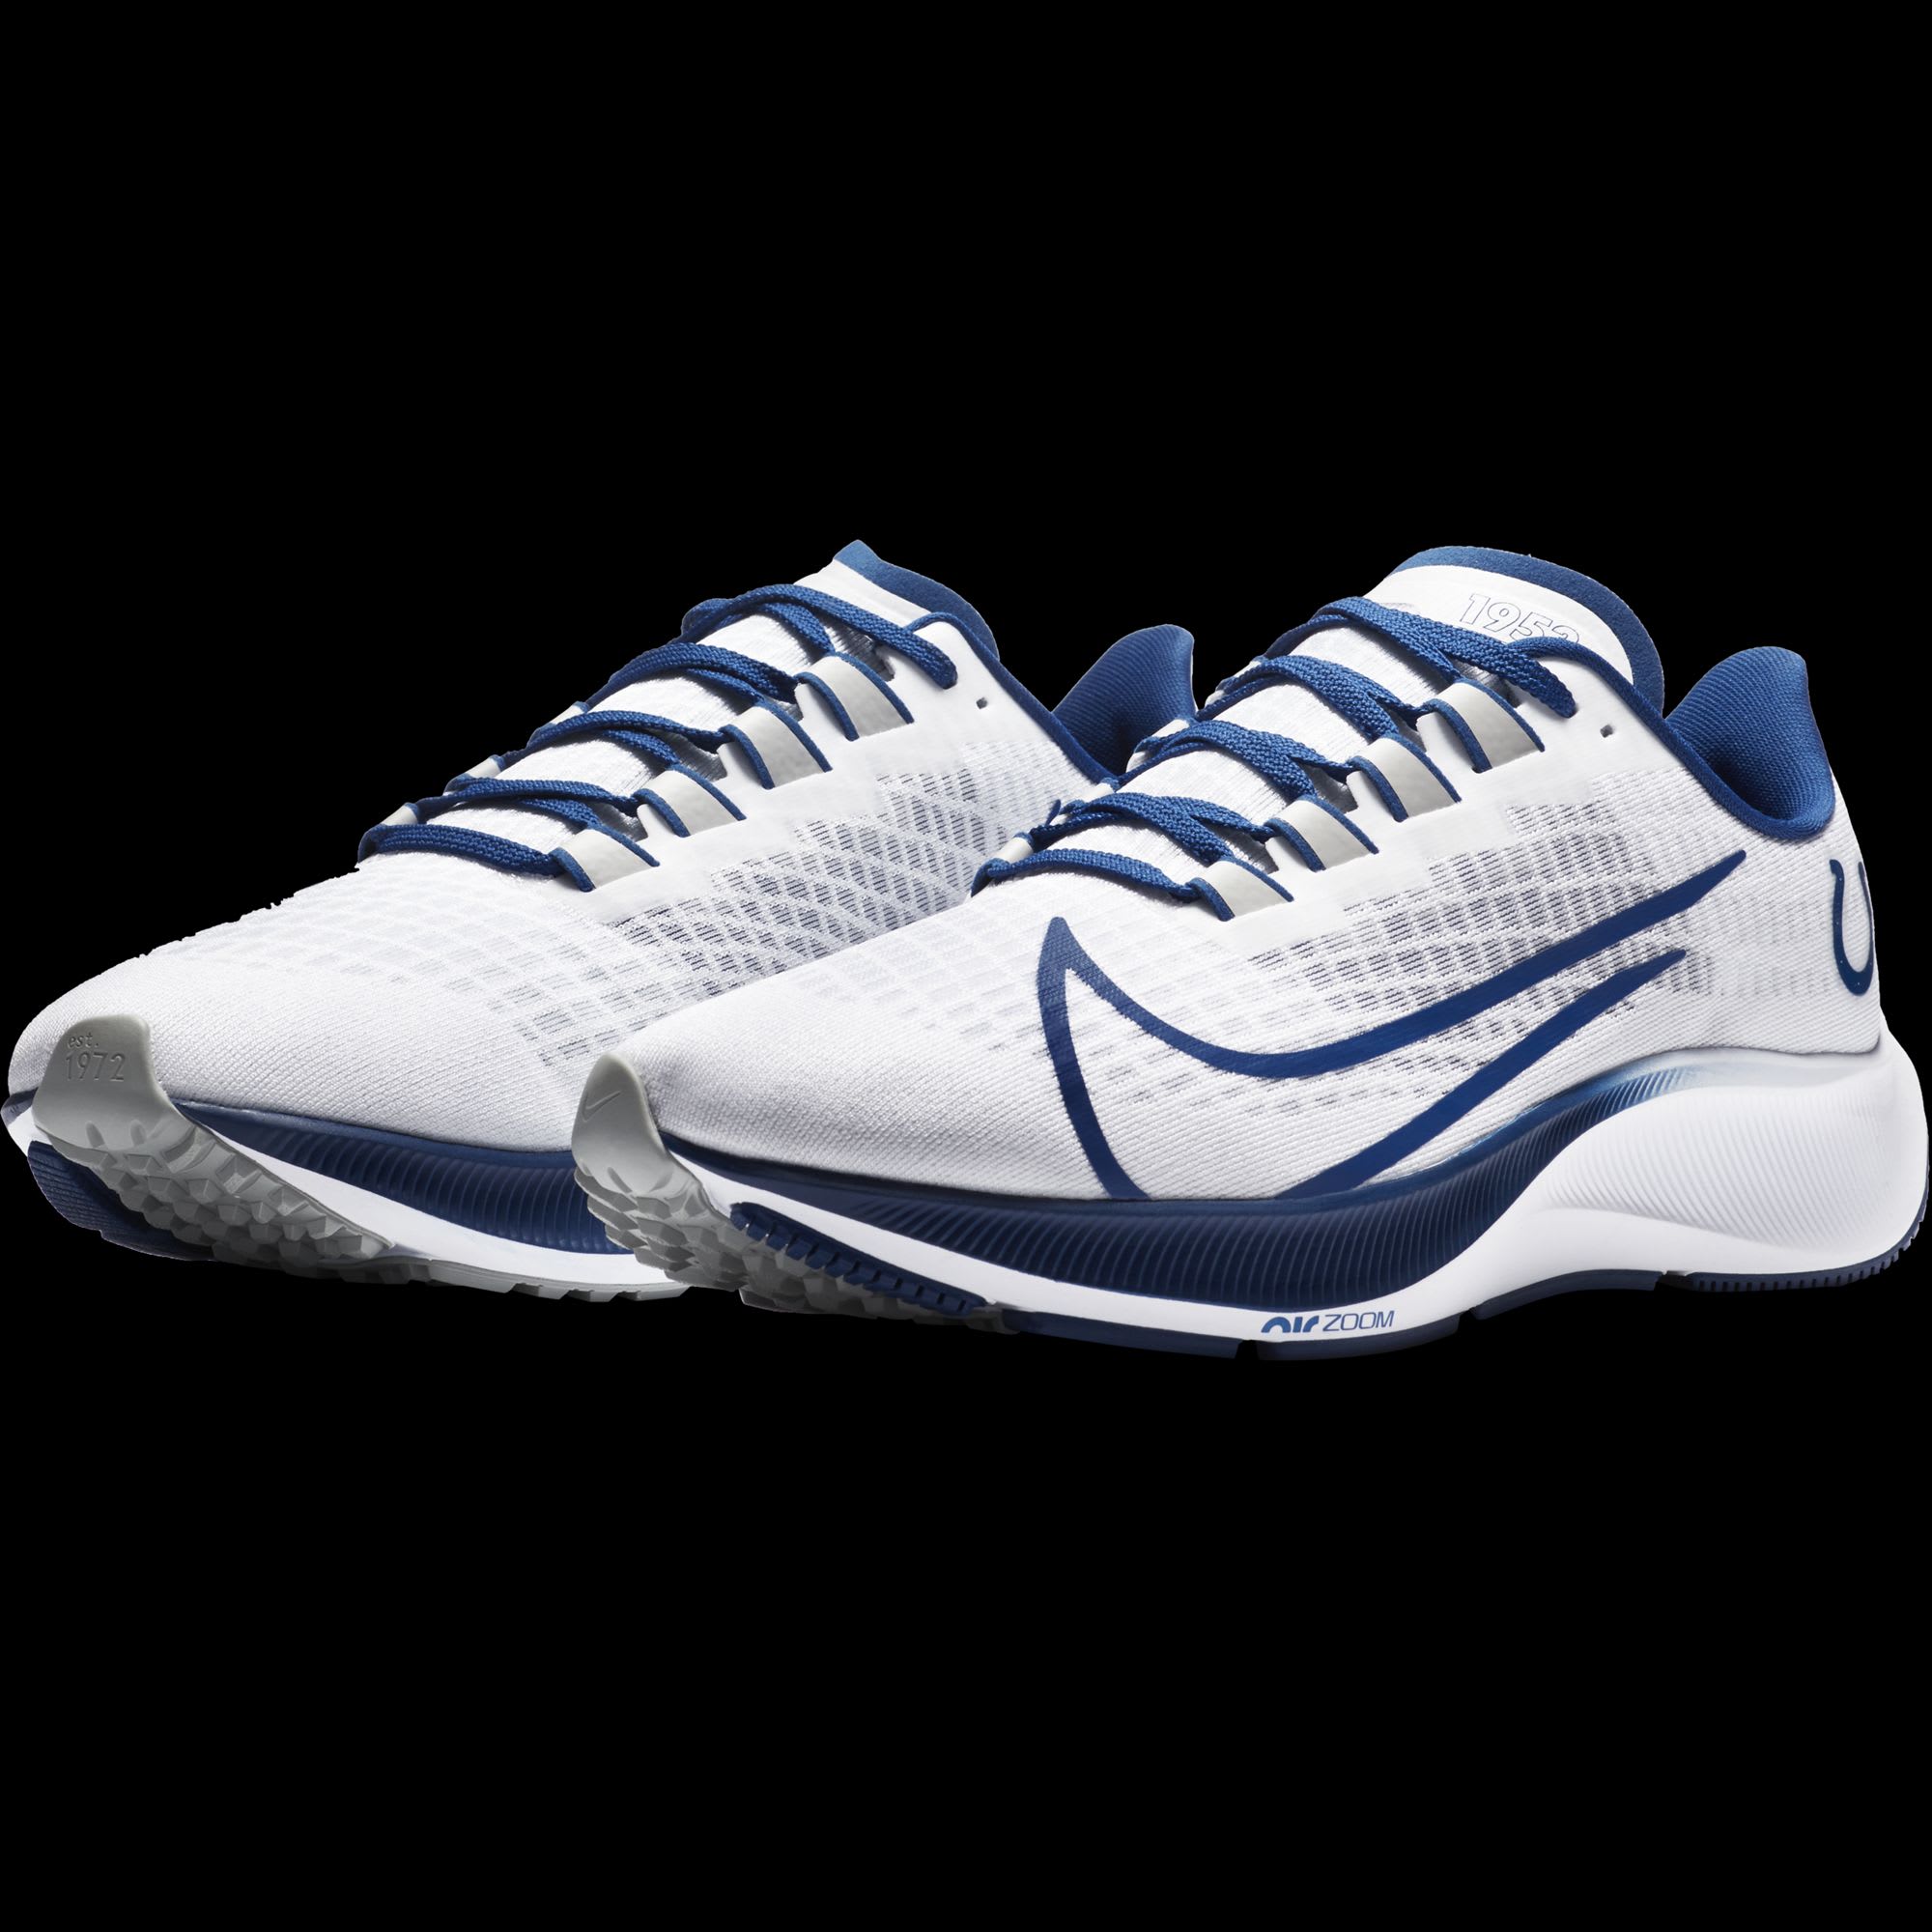 These Nike Indianapolis Colts running 